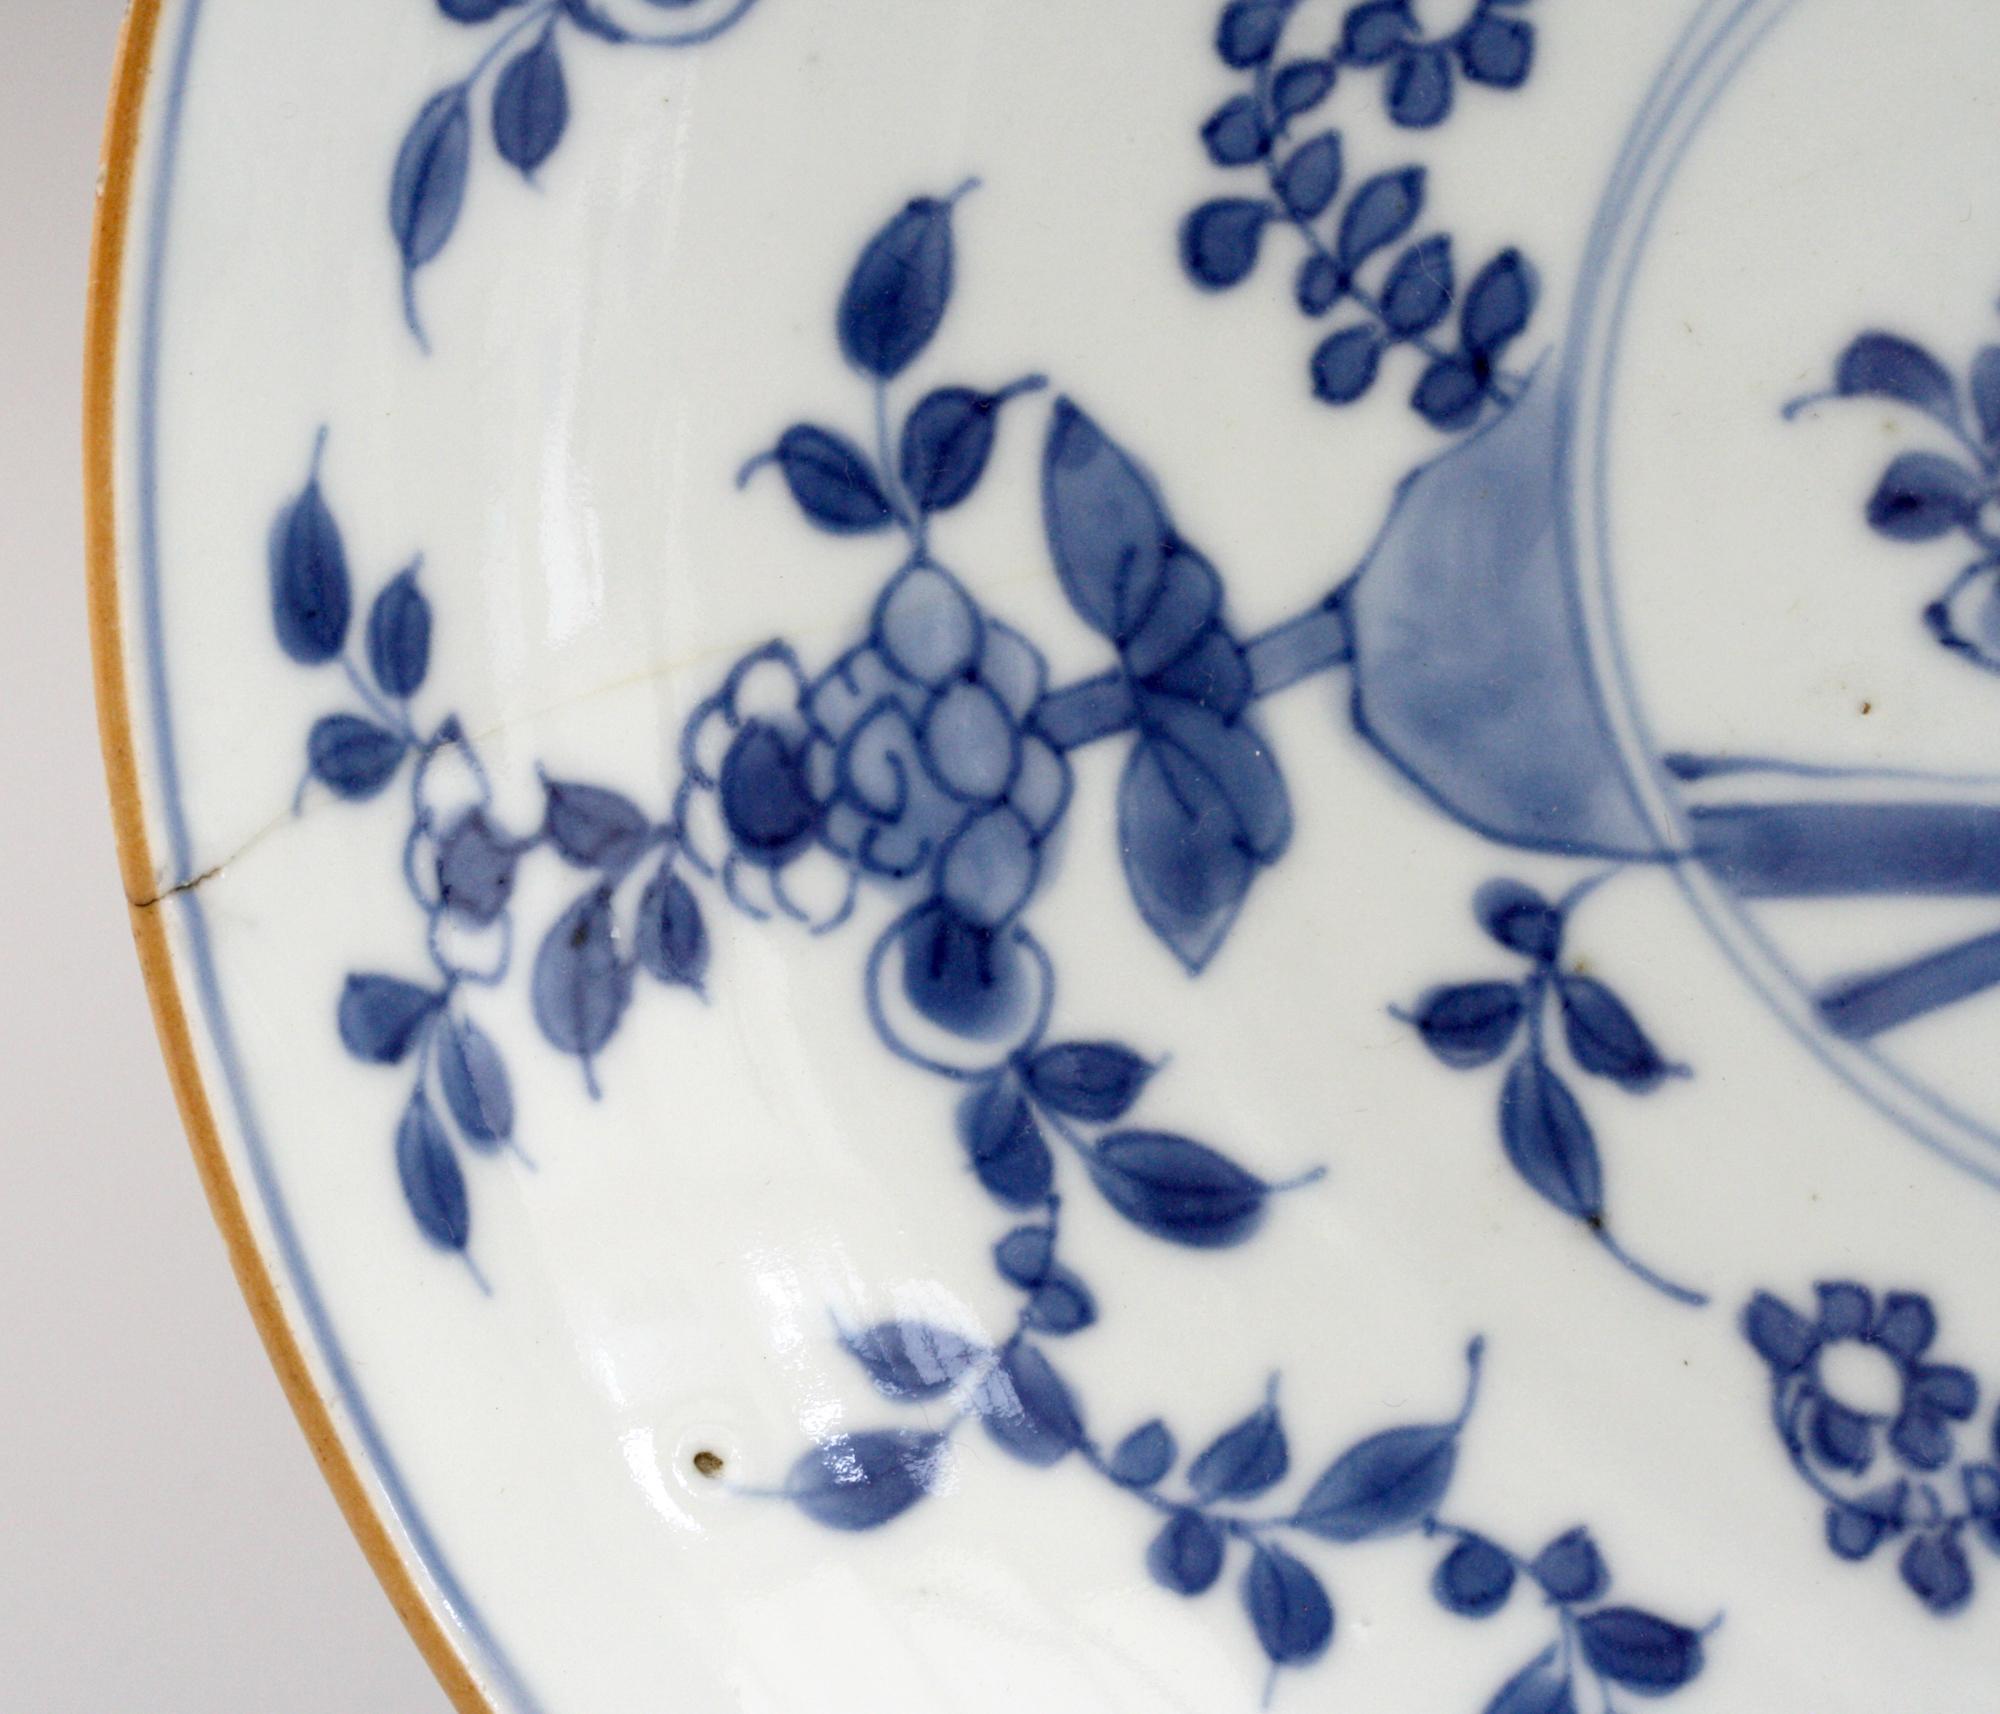 A finely made pair Chinese Kangxi blue and white floral decorated porcelain plates. The plates are of shallow bowl form with flowering roses around the inside of the dish around a small central panel containing a fence and further floral designs.